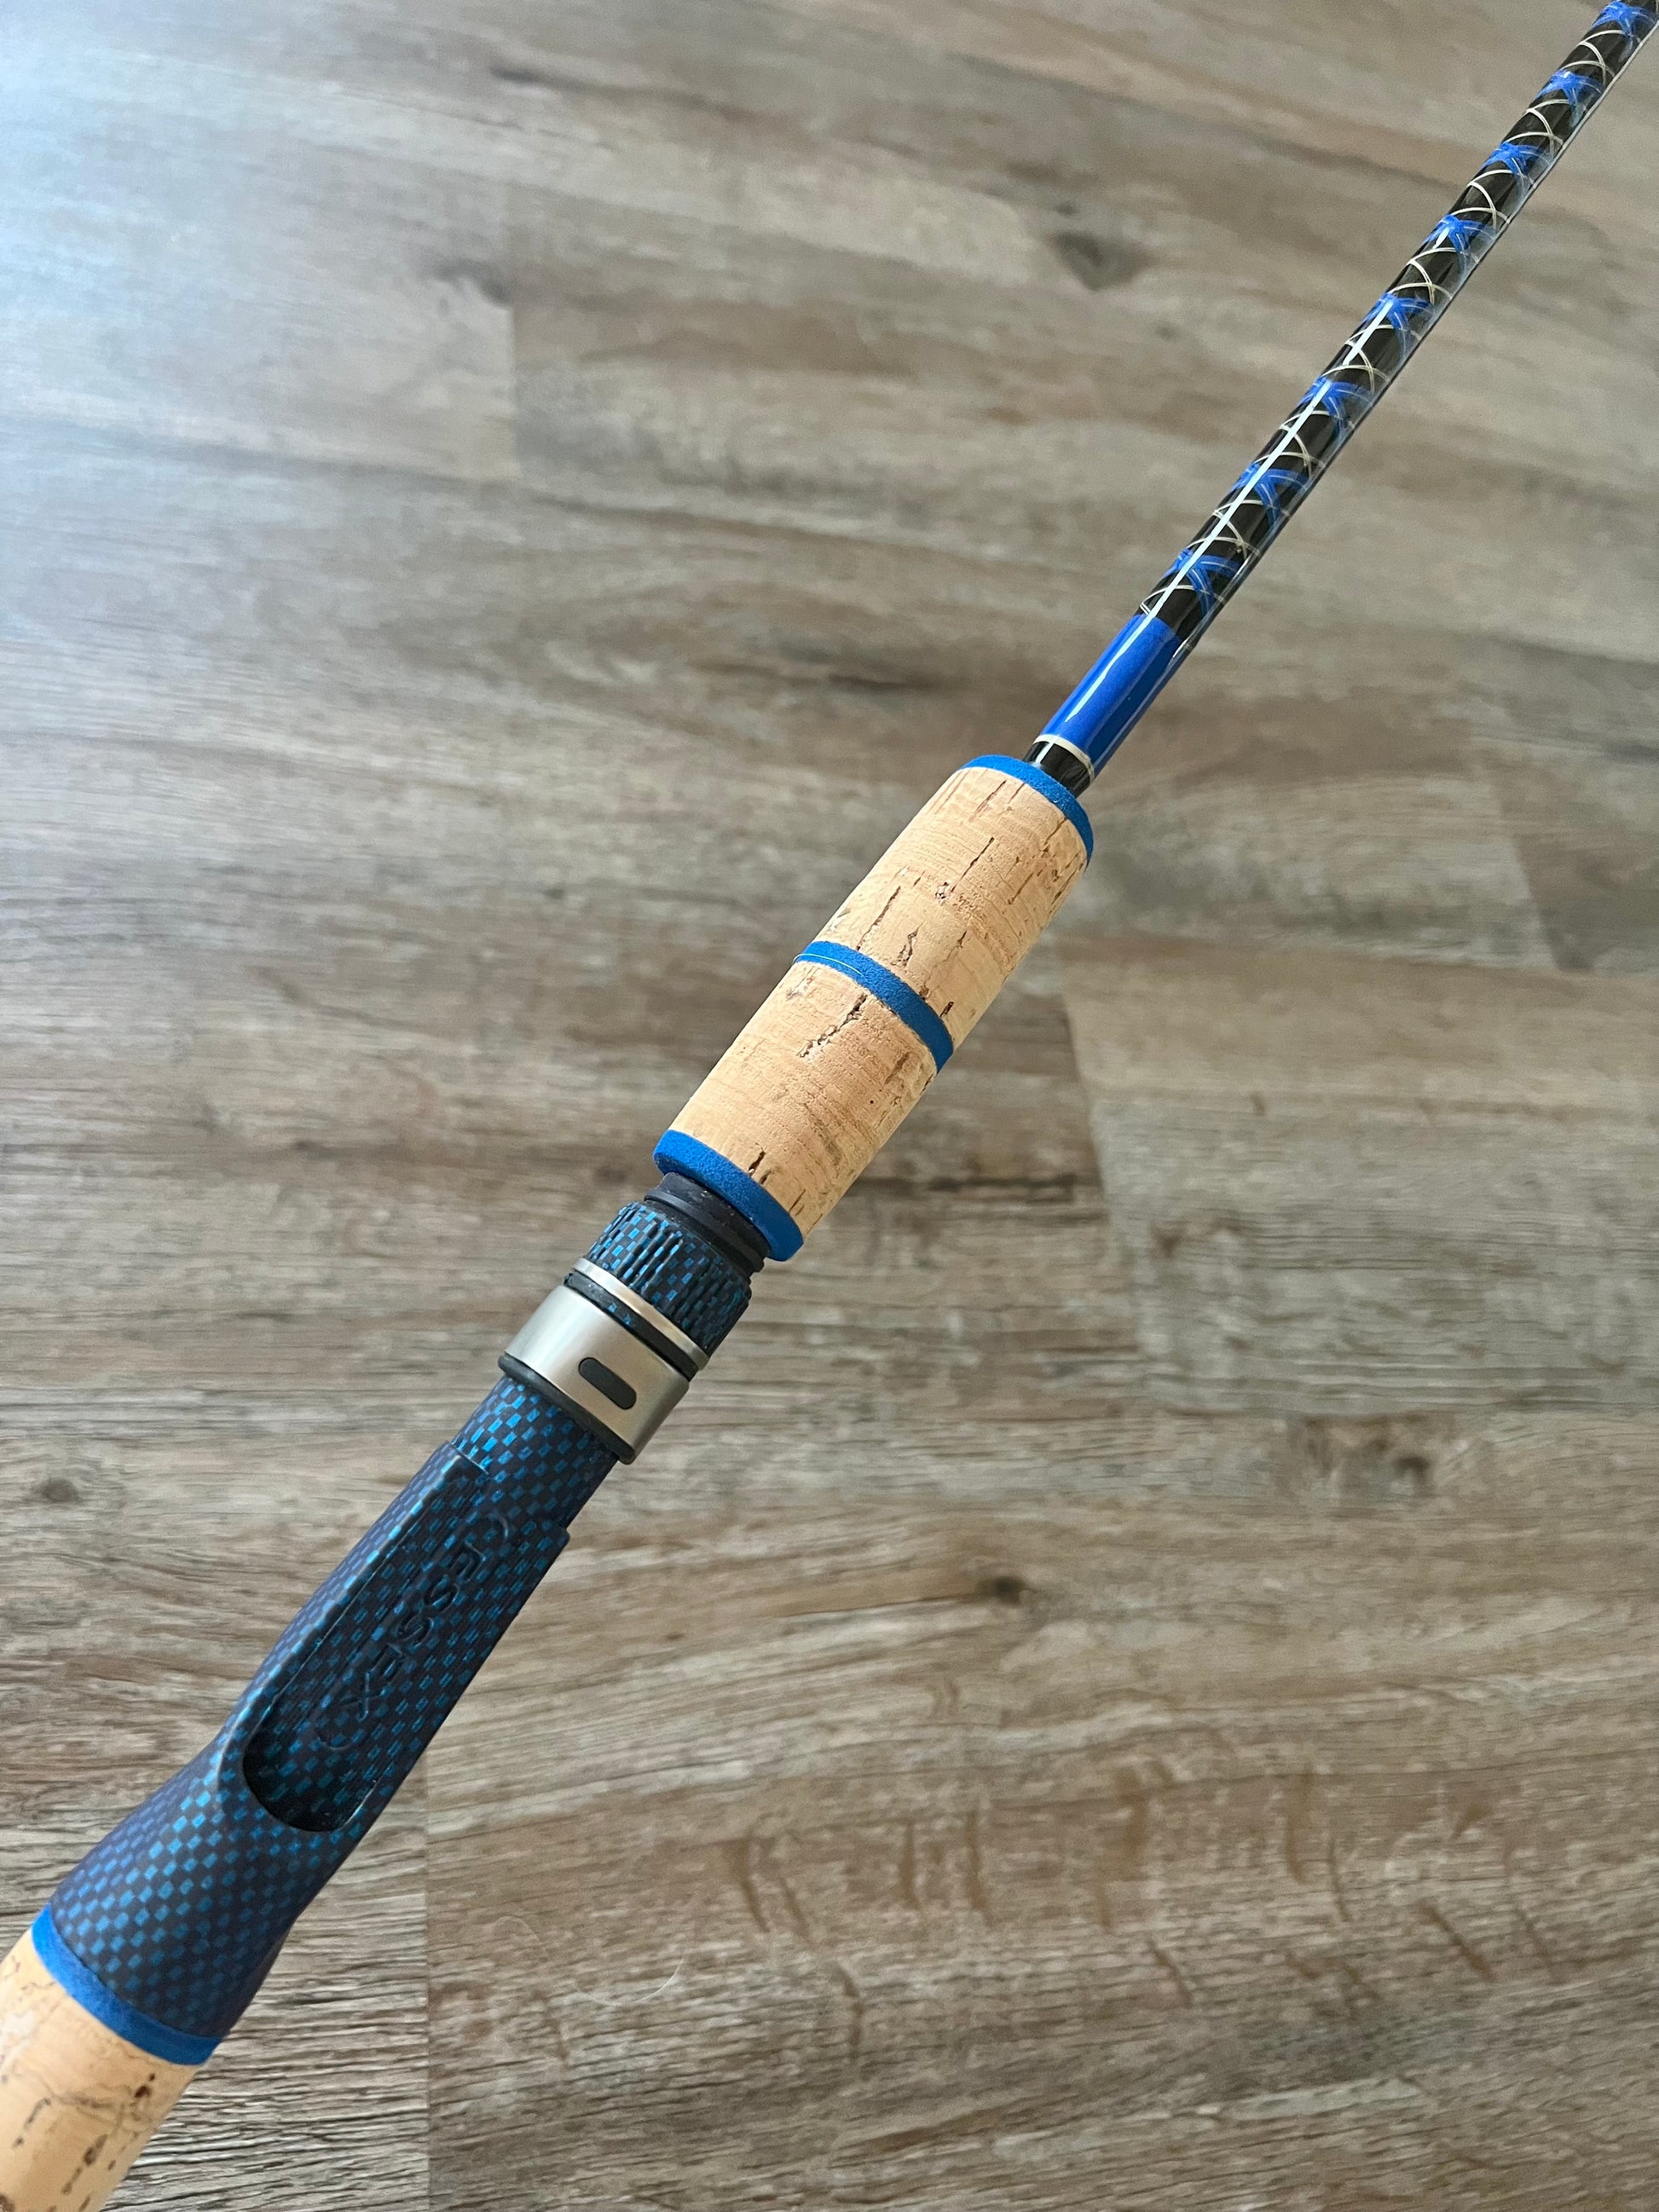 CUSTOM BUILT LAMIGLAS 6 FOOT 6 INCH 15 TO 50 POUND CLASS CONVENTIONAL  FISHING ROD - Berinson Tackle Company